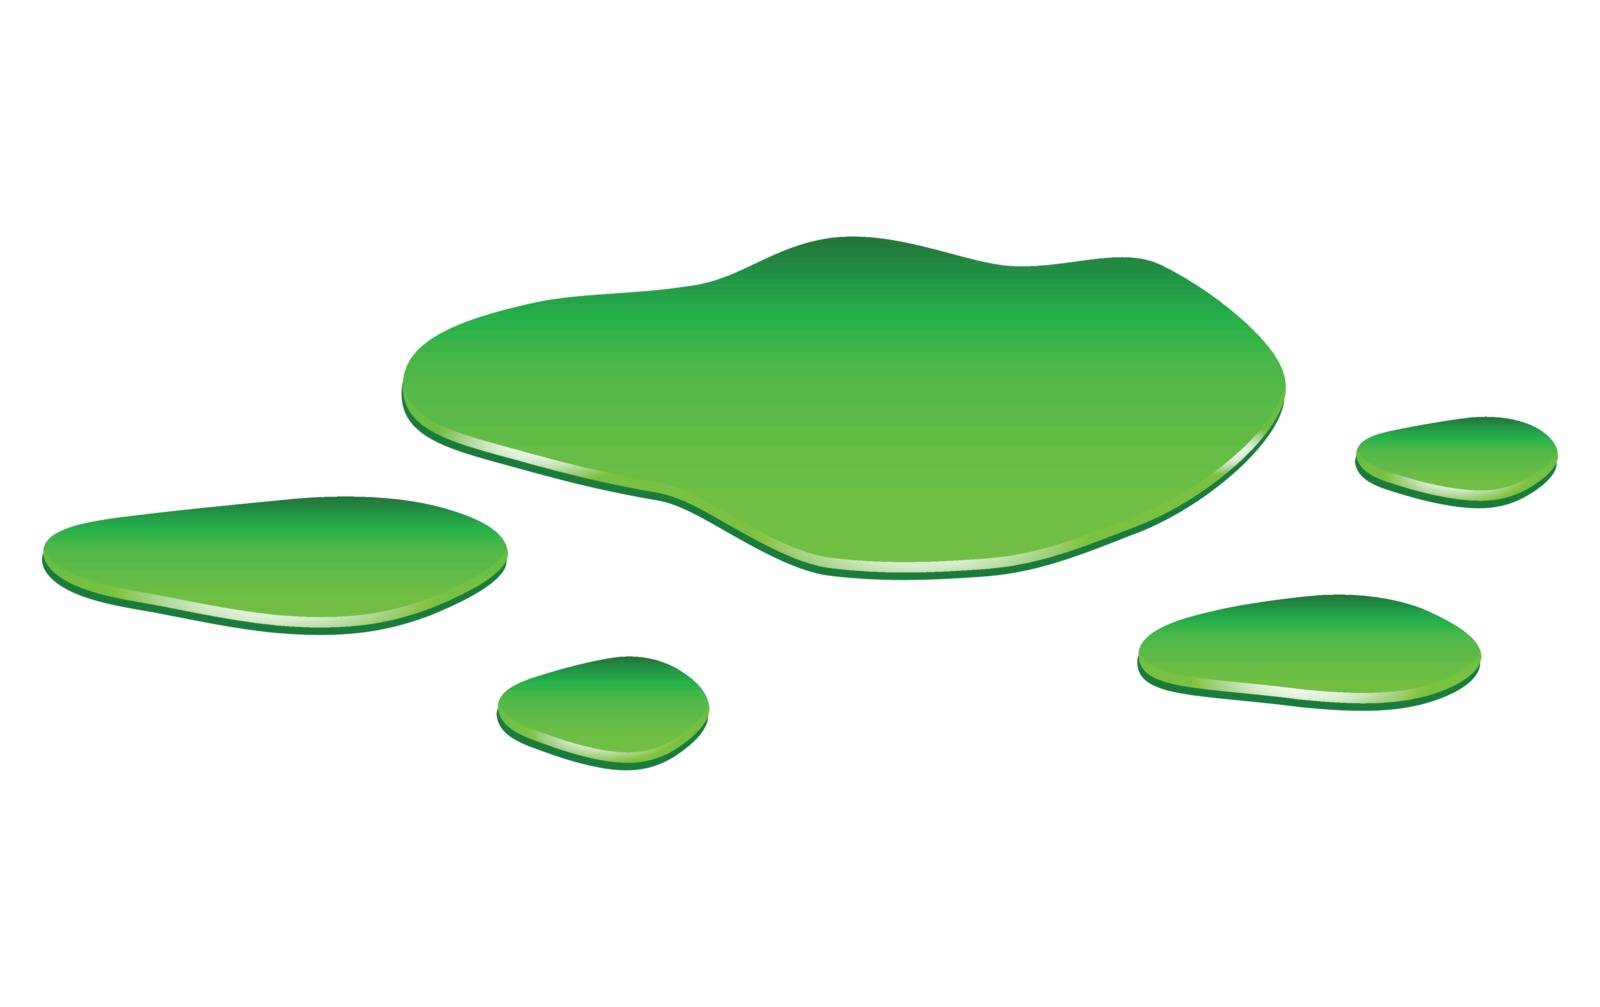 Puddle of toxic substance spill. Green chemical stain, plash, drop. Vector illustration isolated on the white background by wektorygrafika